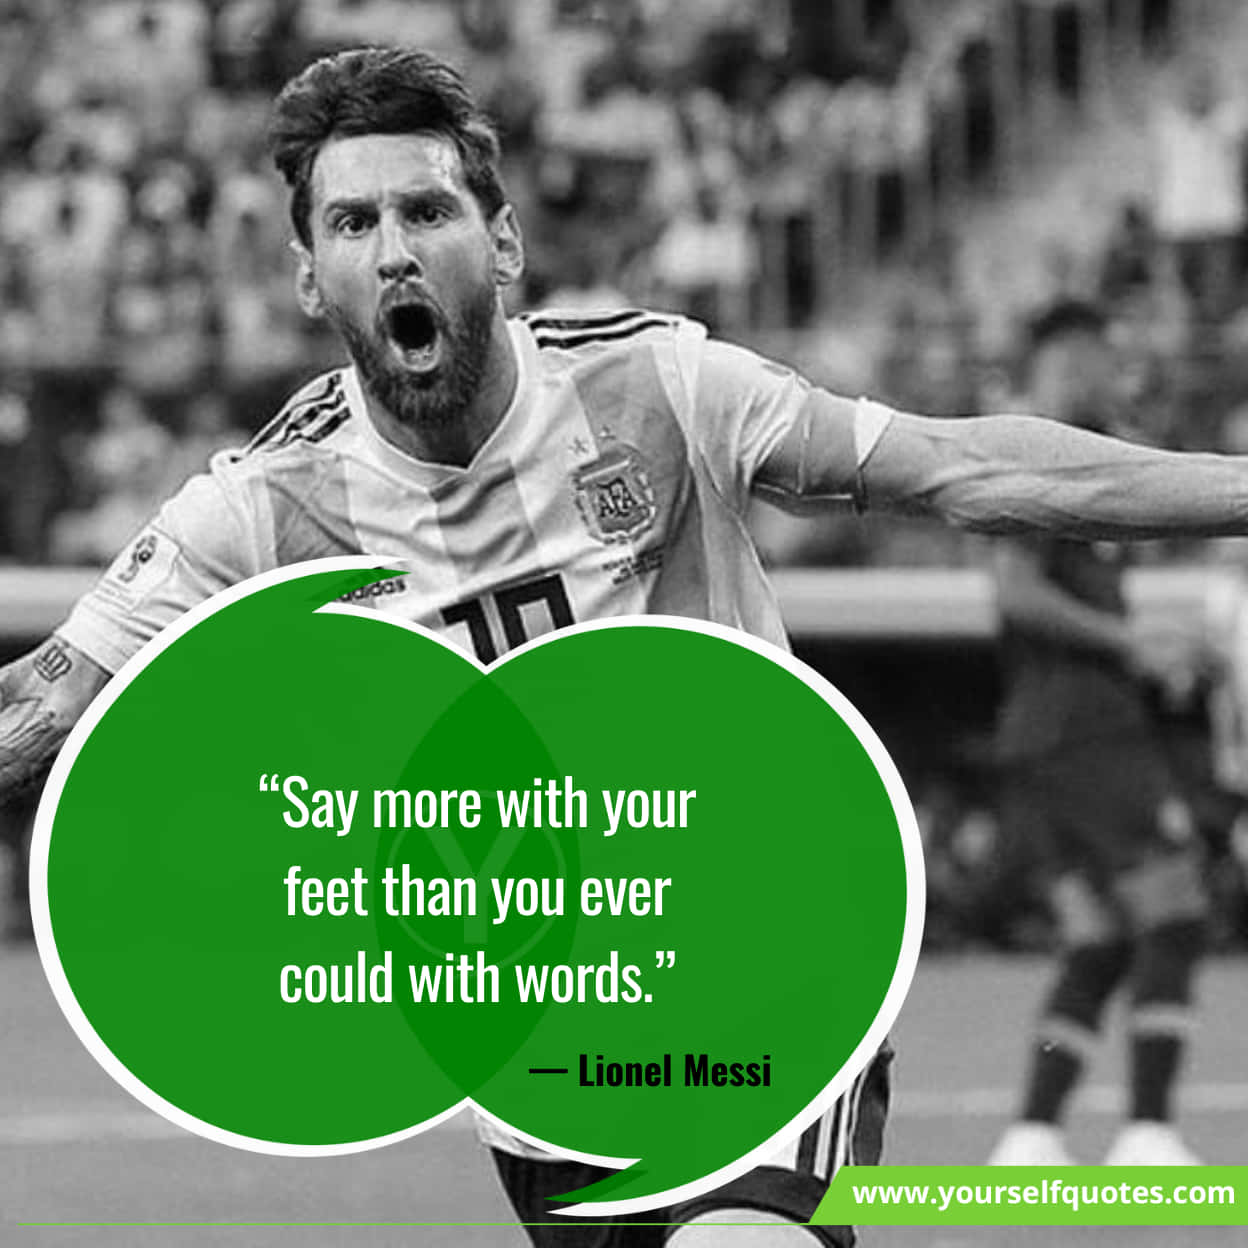 Lionel Messi Quotes About Football